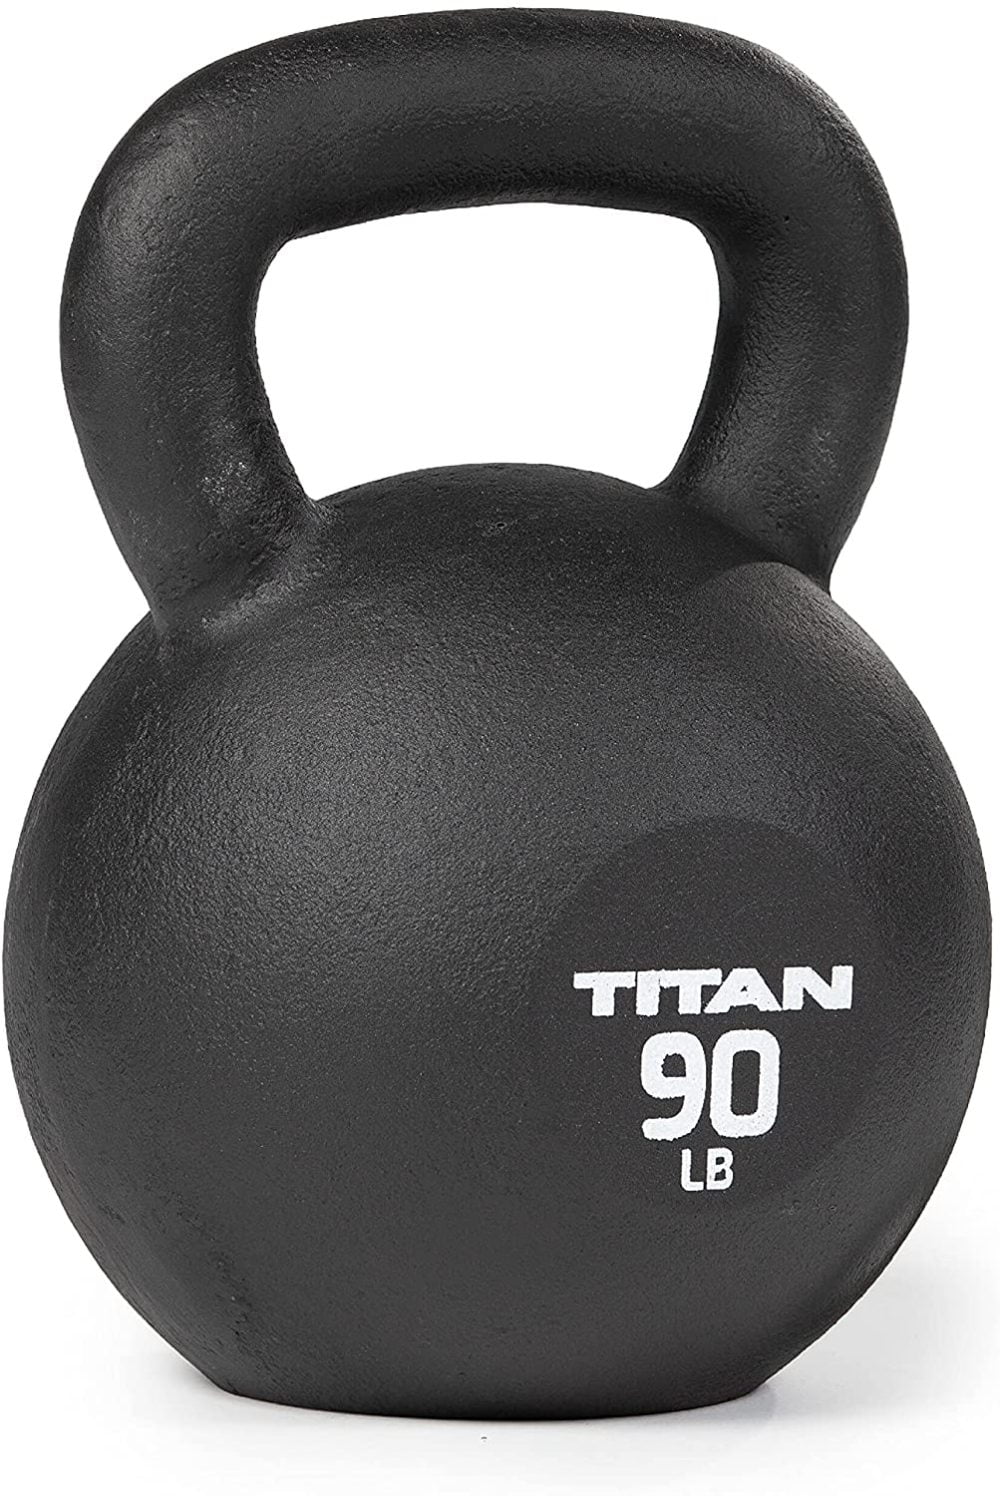 Single Piece Casting Full Body Workout Titan Fitness 100 LB Cast Iron Kettlebell LB and KG Markings 